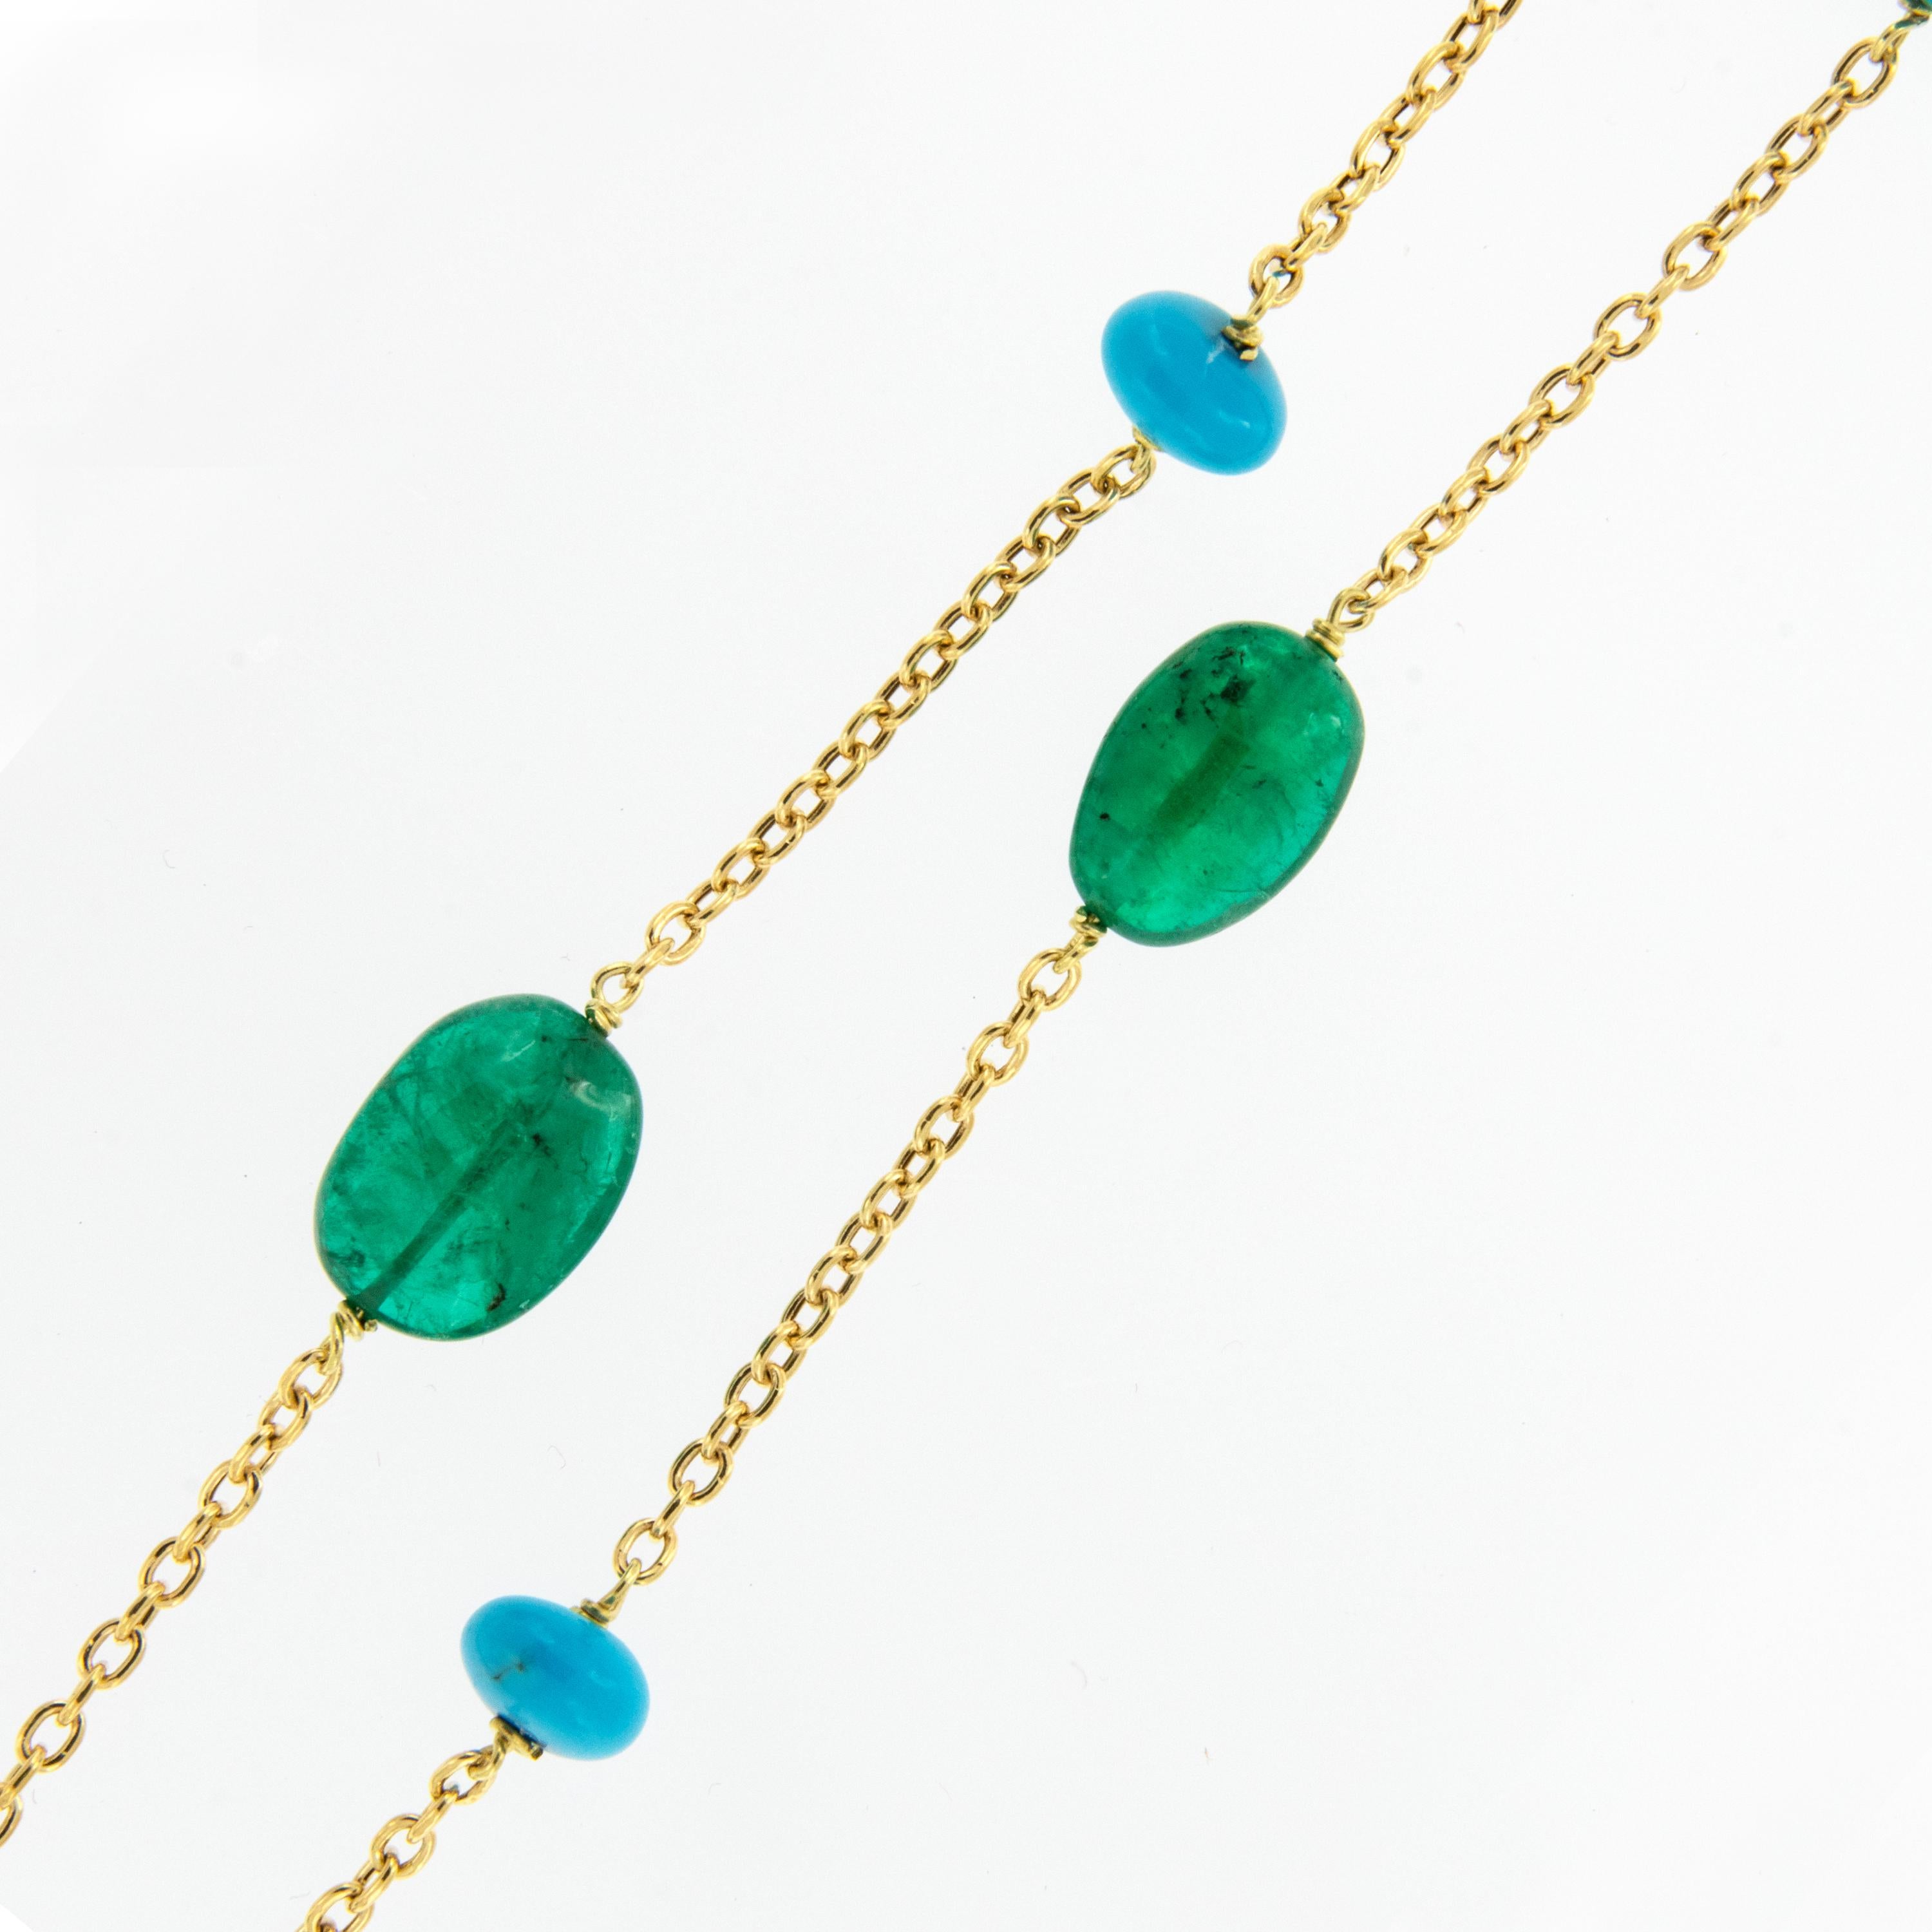 Contemporary 18 Karat Yellow Gold Sleeping Beauty Turquoise and Emerald Necklace by Goshwara